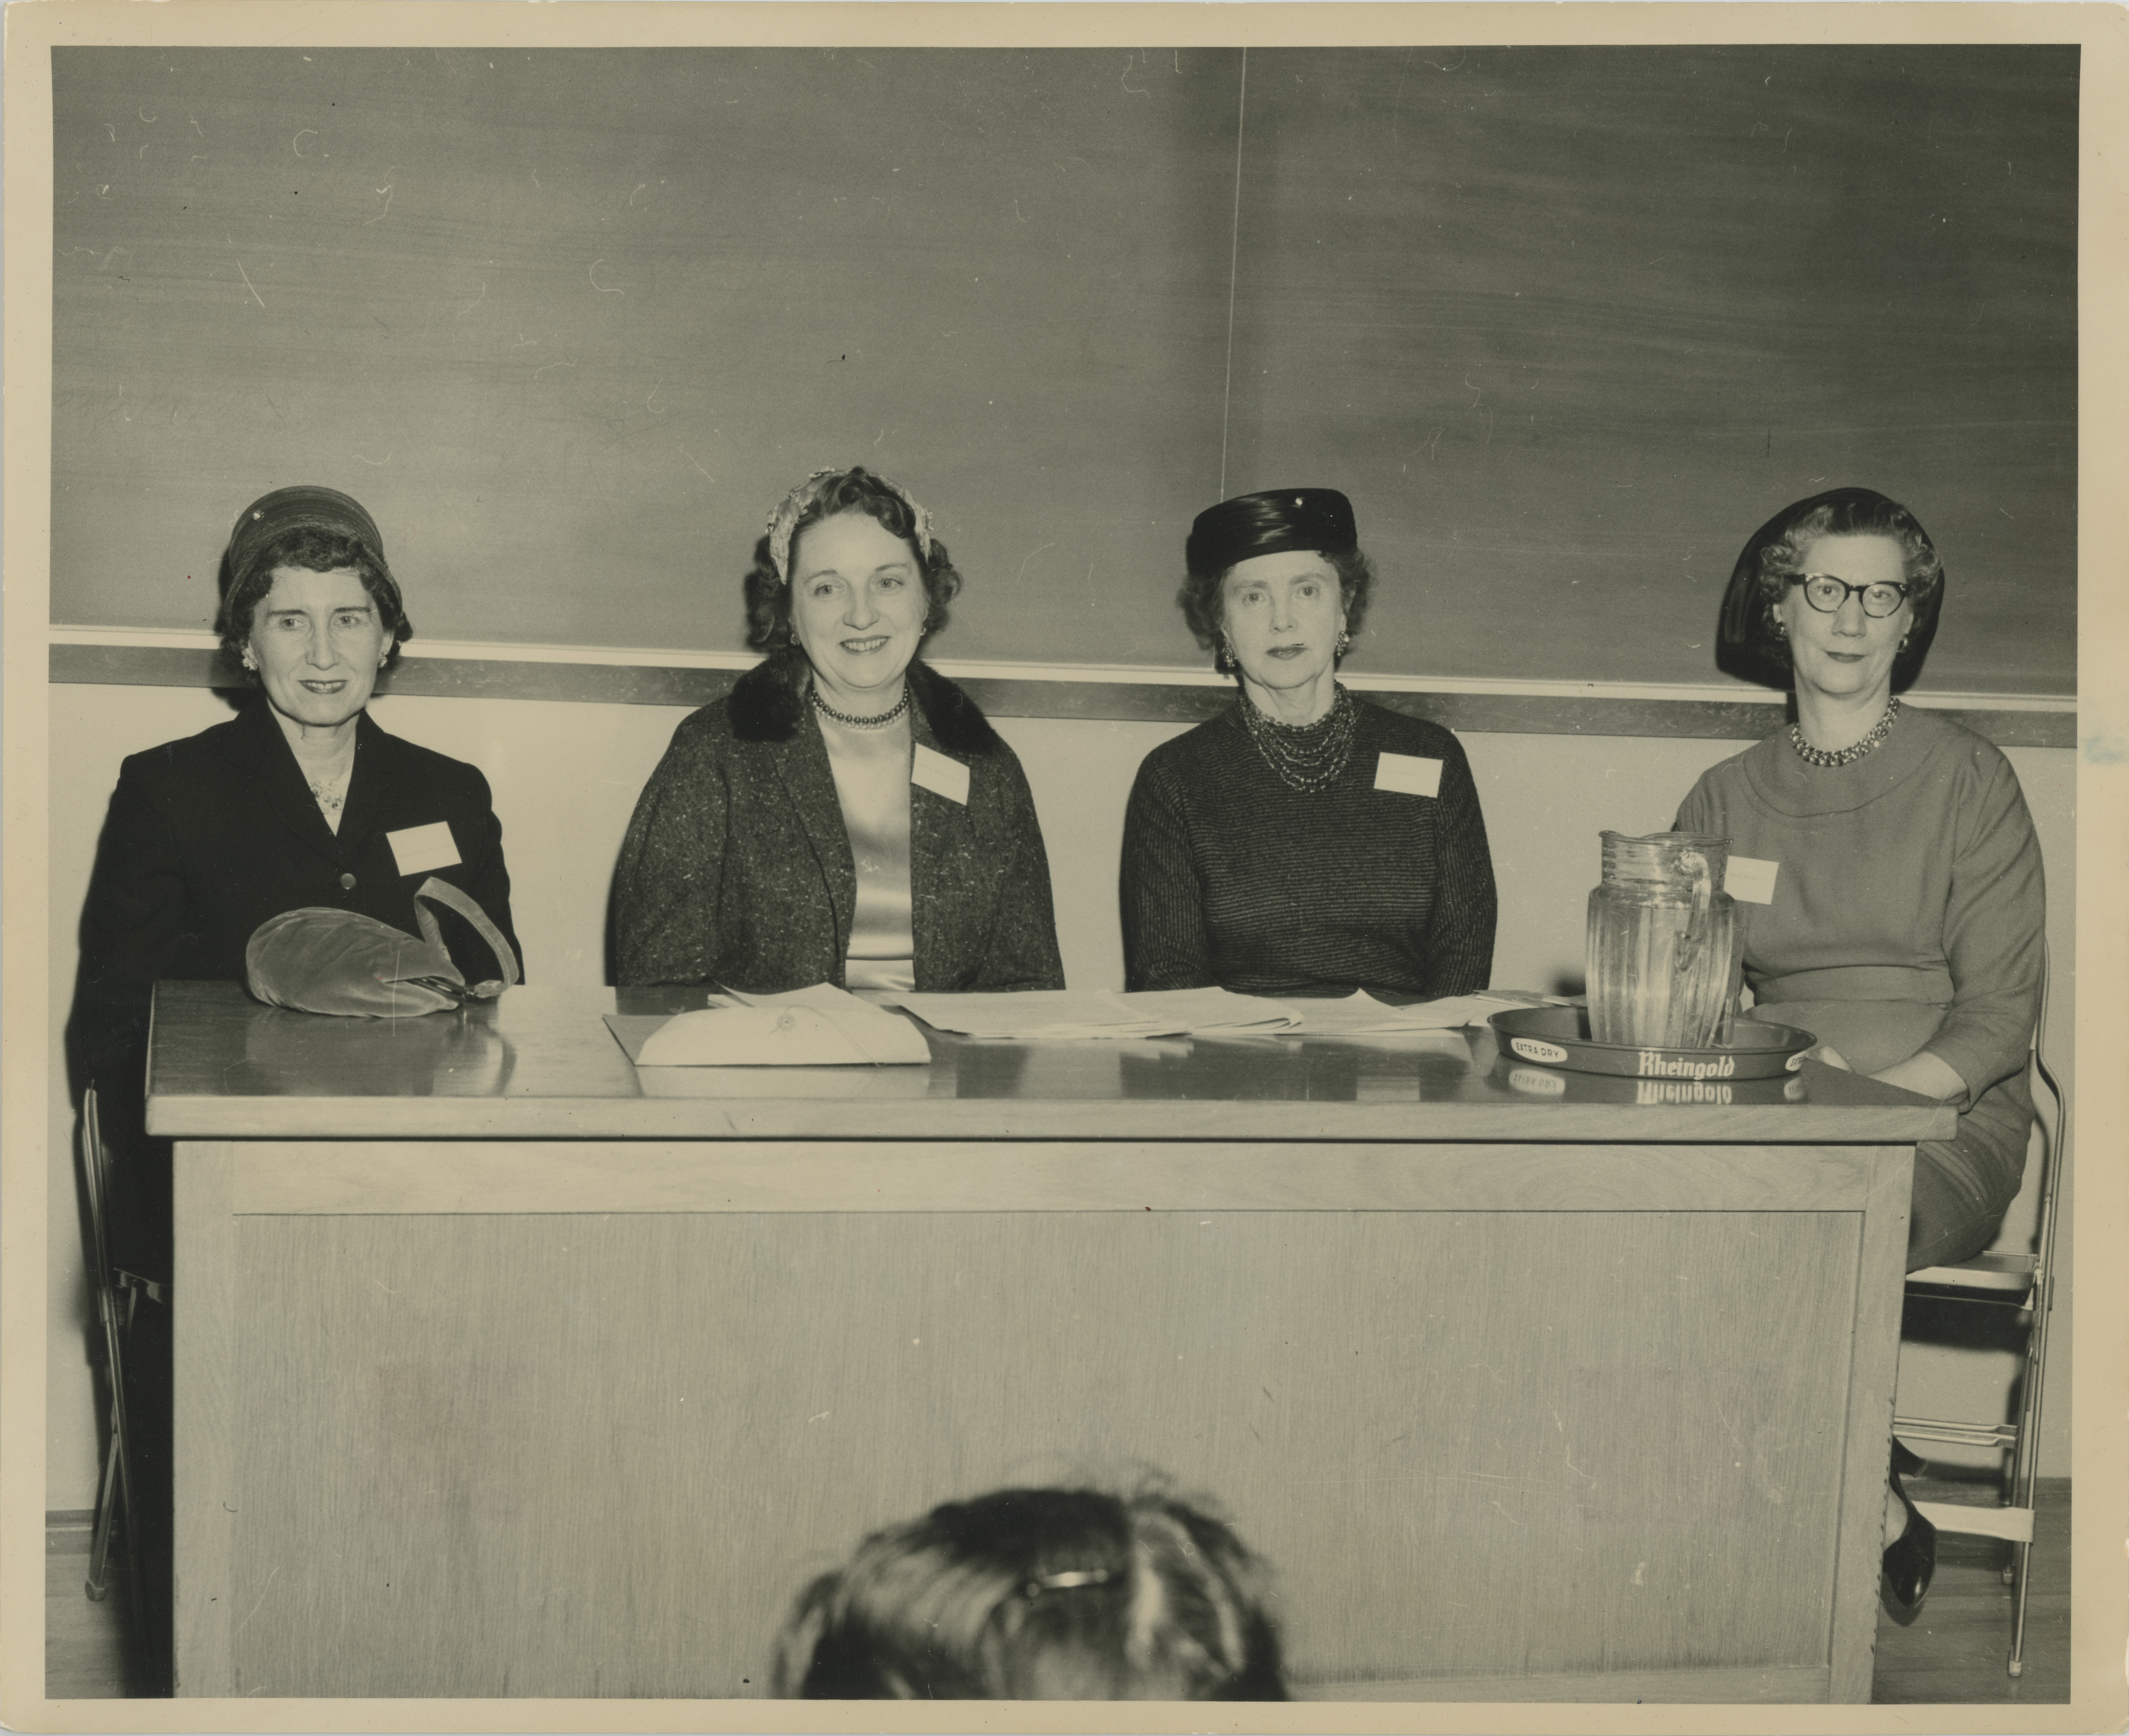 Black and white aged image of four women sitting at a desk smiling toward the camera, a chalk board in the background